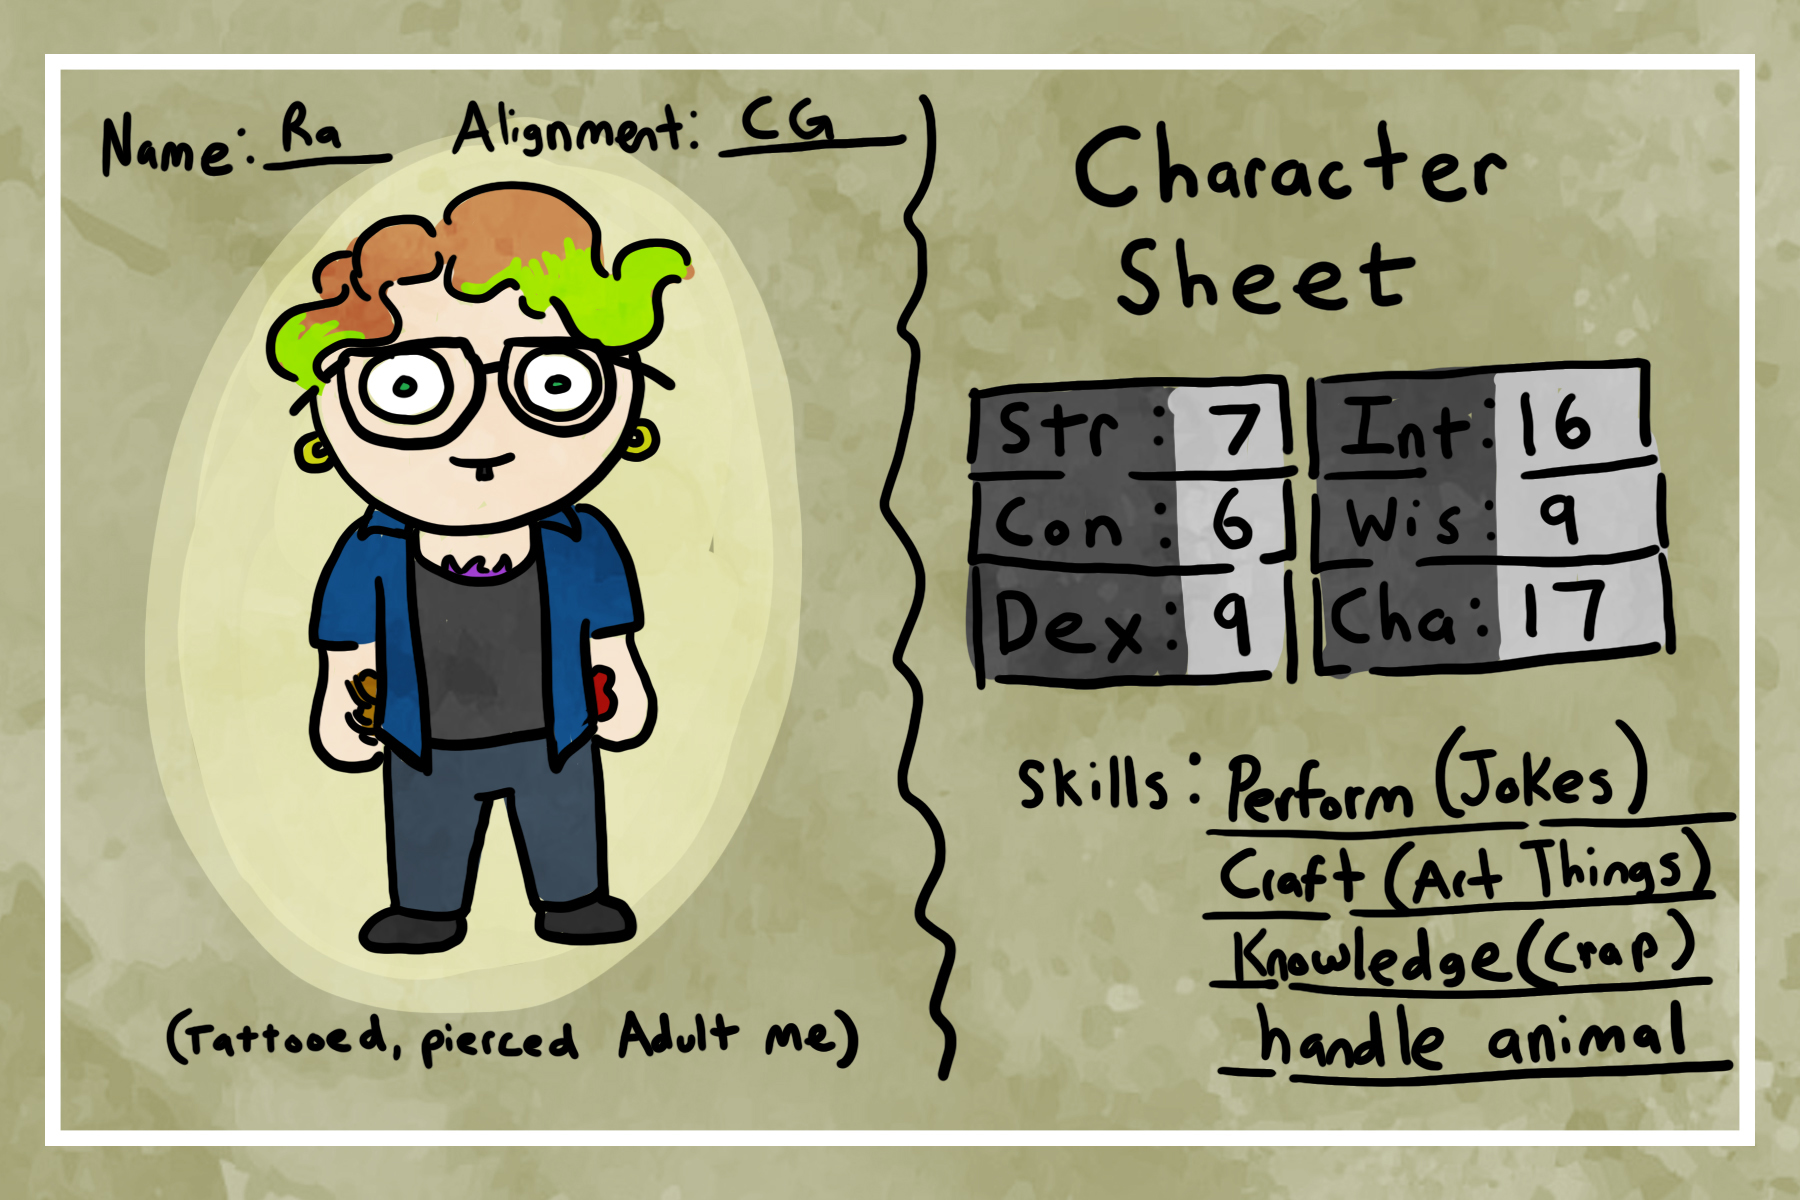 Drawing of a Dungeons and Dragons character sheet. Name: Ra Alignment: CG Drawing of "tattooed, pierced Adult me." Character Sheet: Strength 7, Constitution 6, Dexterity 9, Intelligence 16, Wisdom 9, Charisma 17. Skills: Perform (jokes), Craft (art things), Knowledge (crap), handle animal